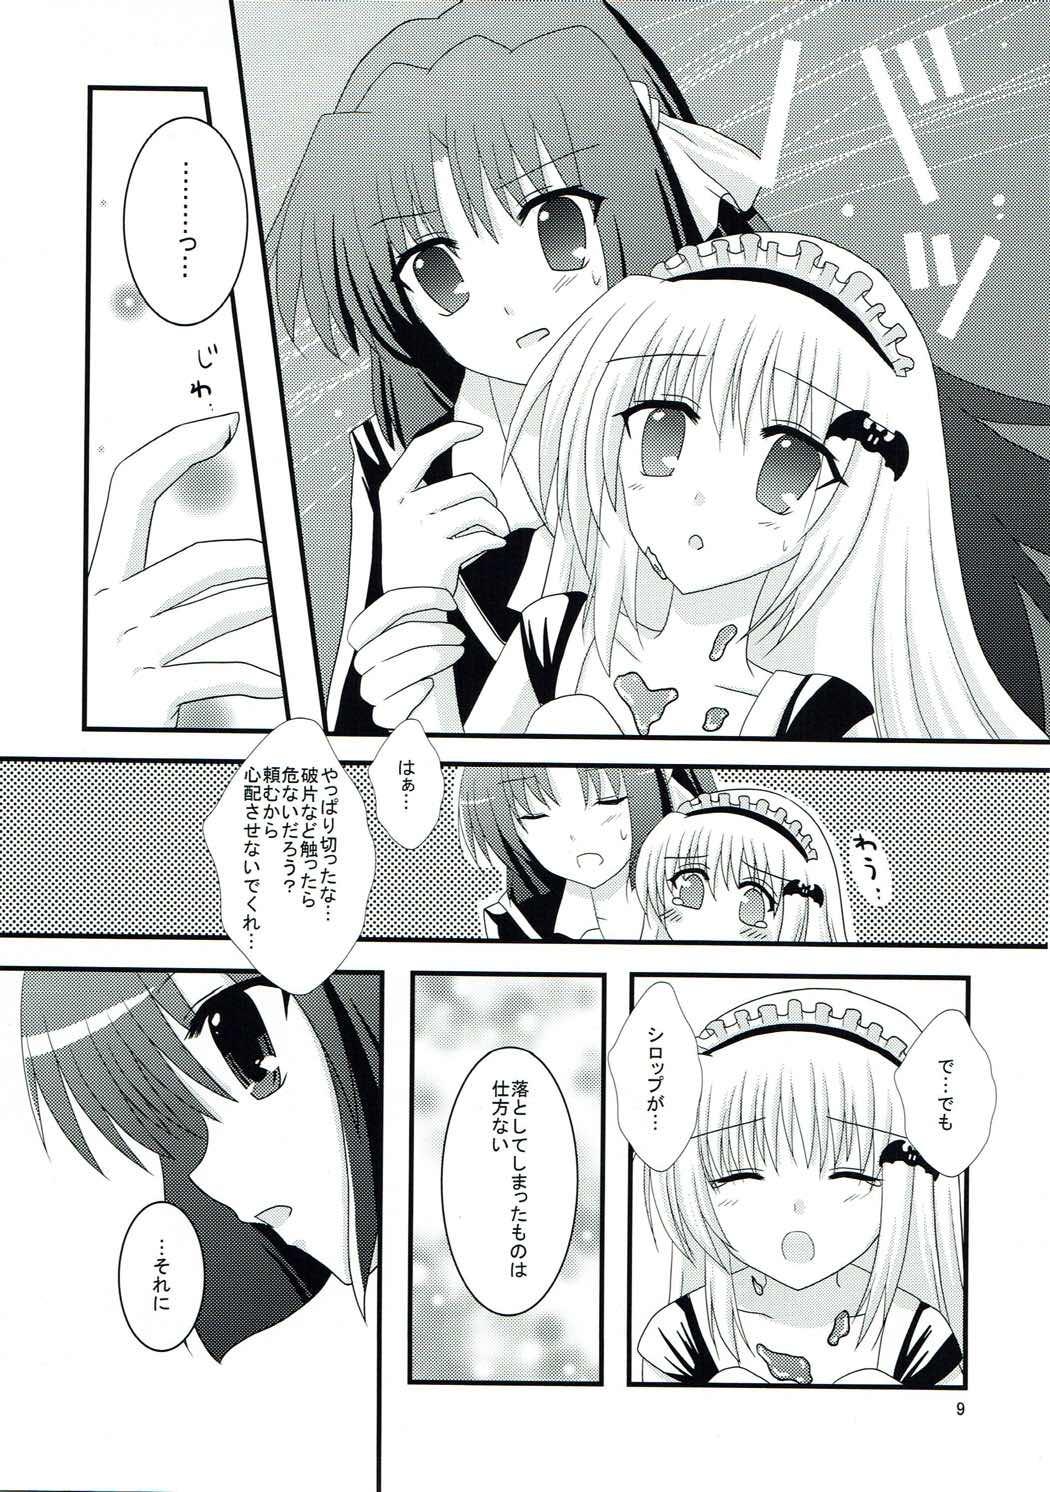 Suck Maple Syrup - Little busters Amazing - Page 8